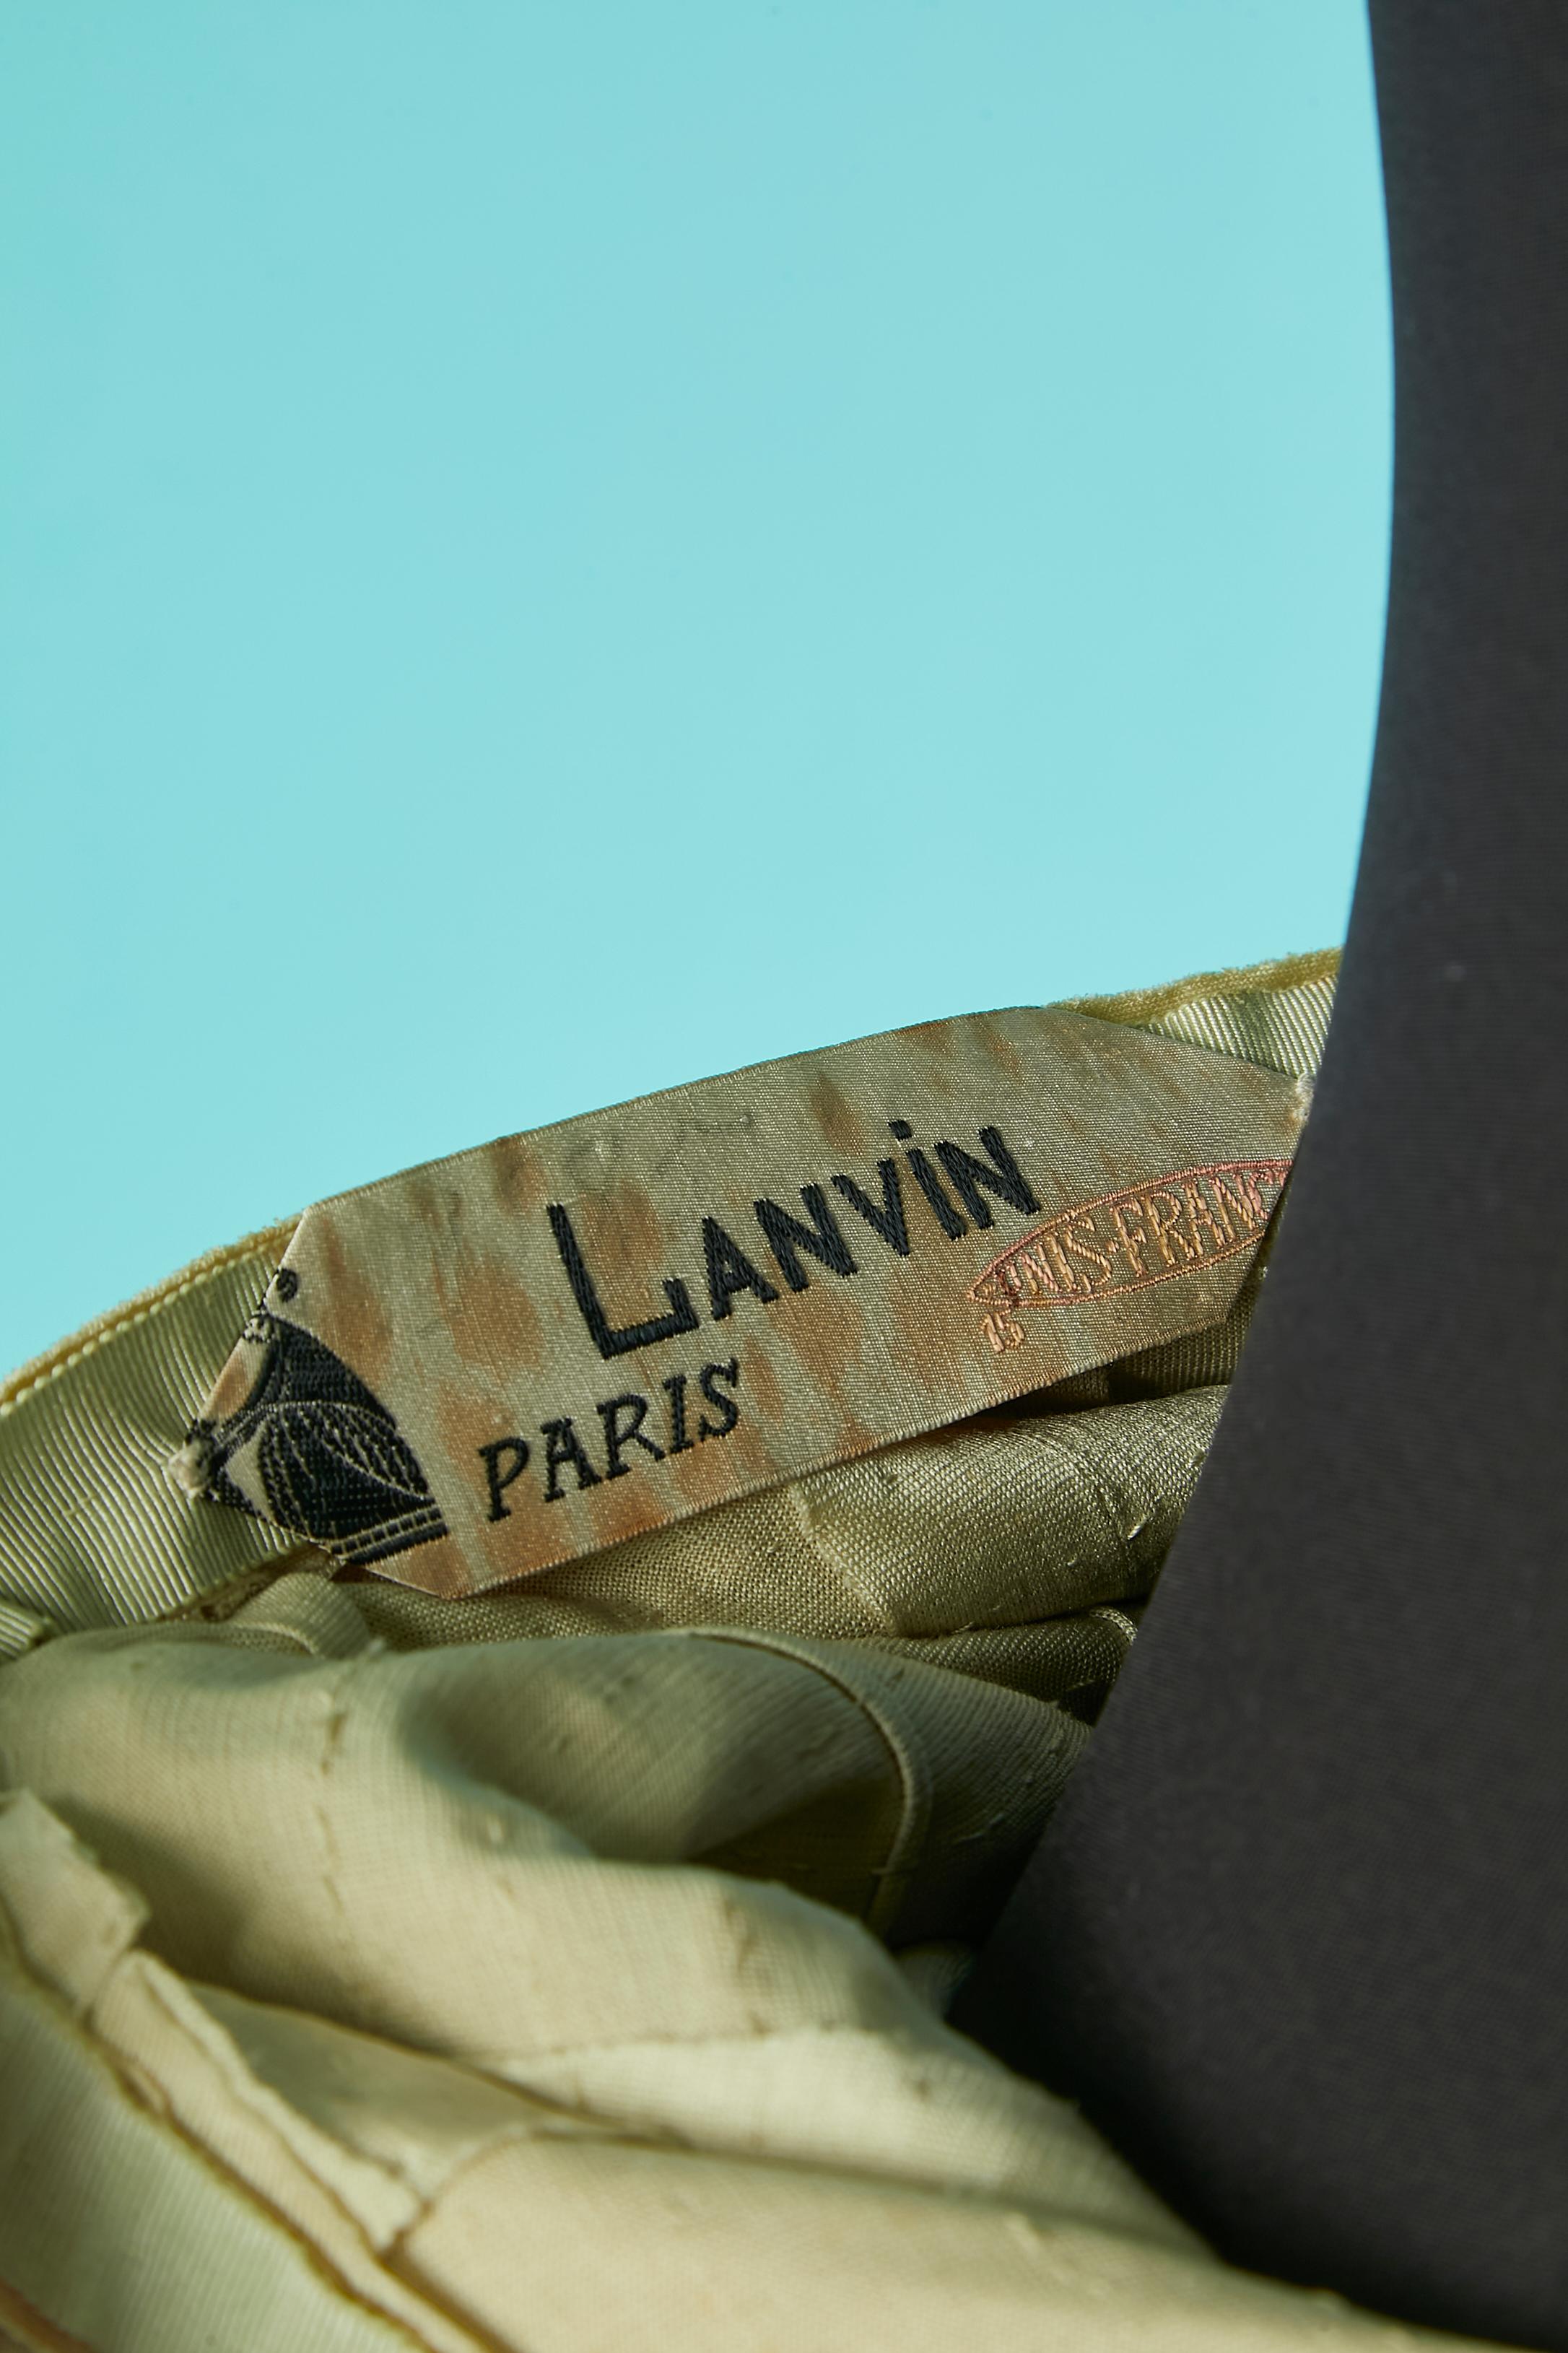 Iconic silk jersey draped and pleated handmade evening dress Lanvin Paris 1944 For Sale 9